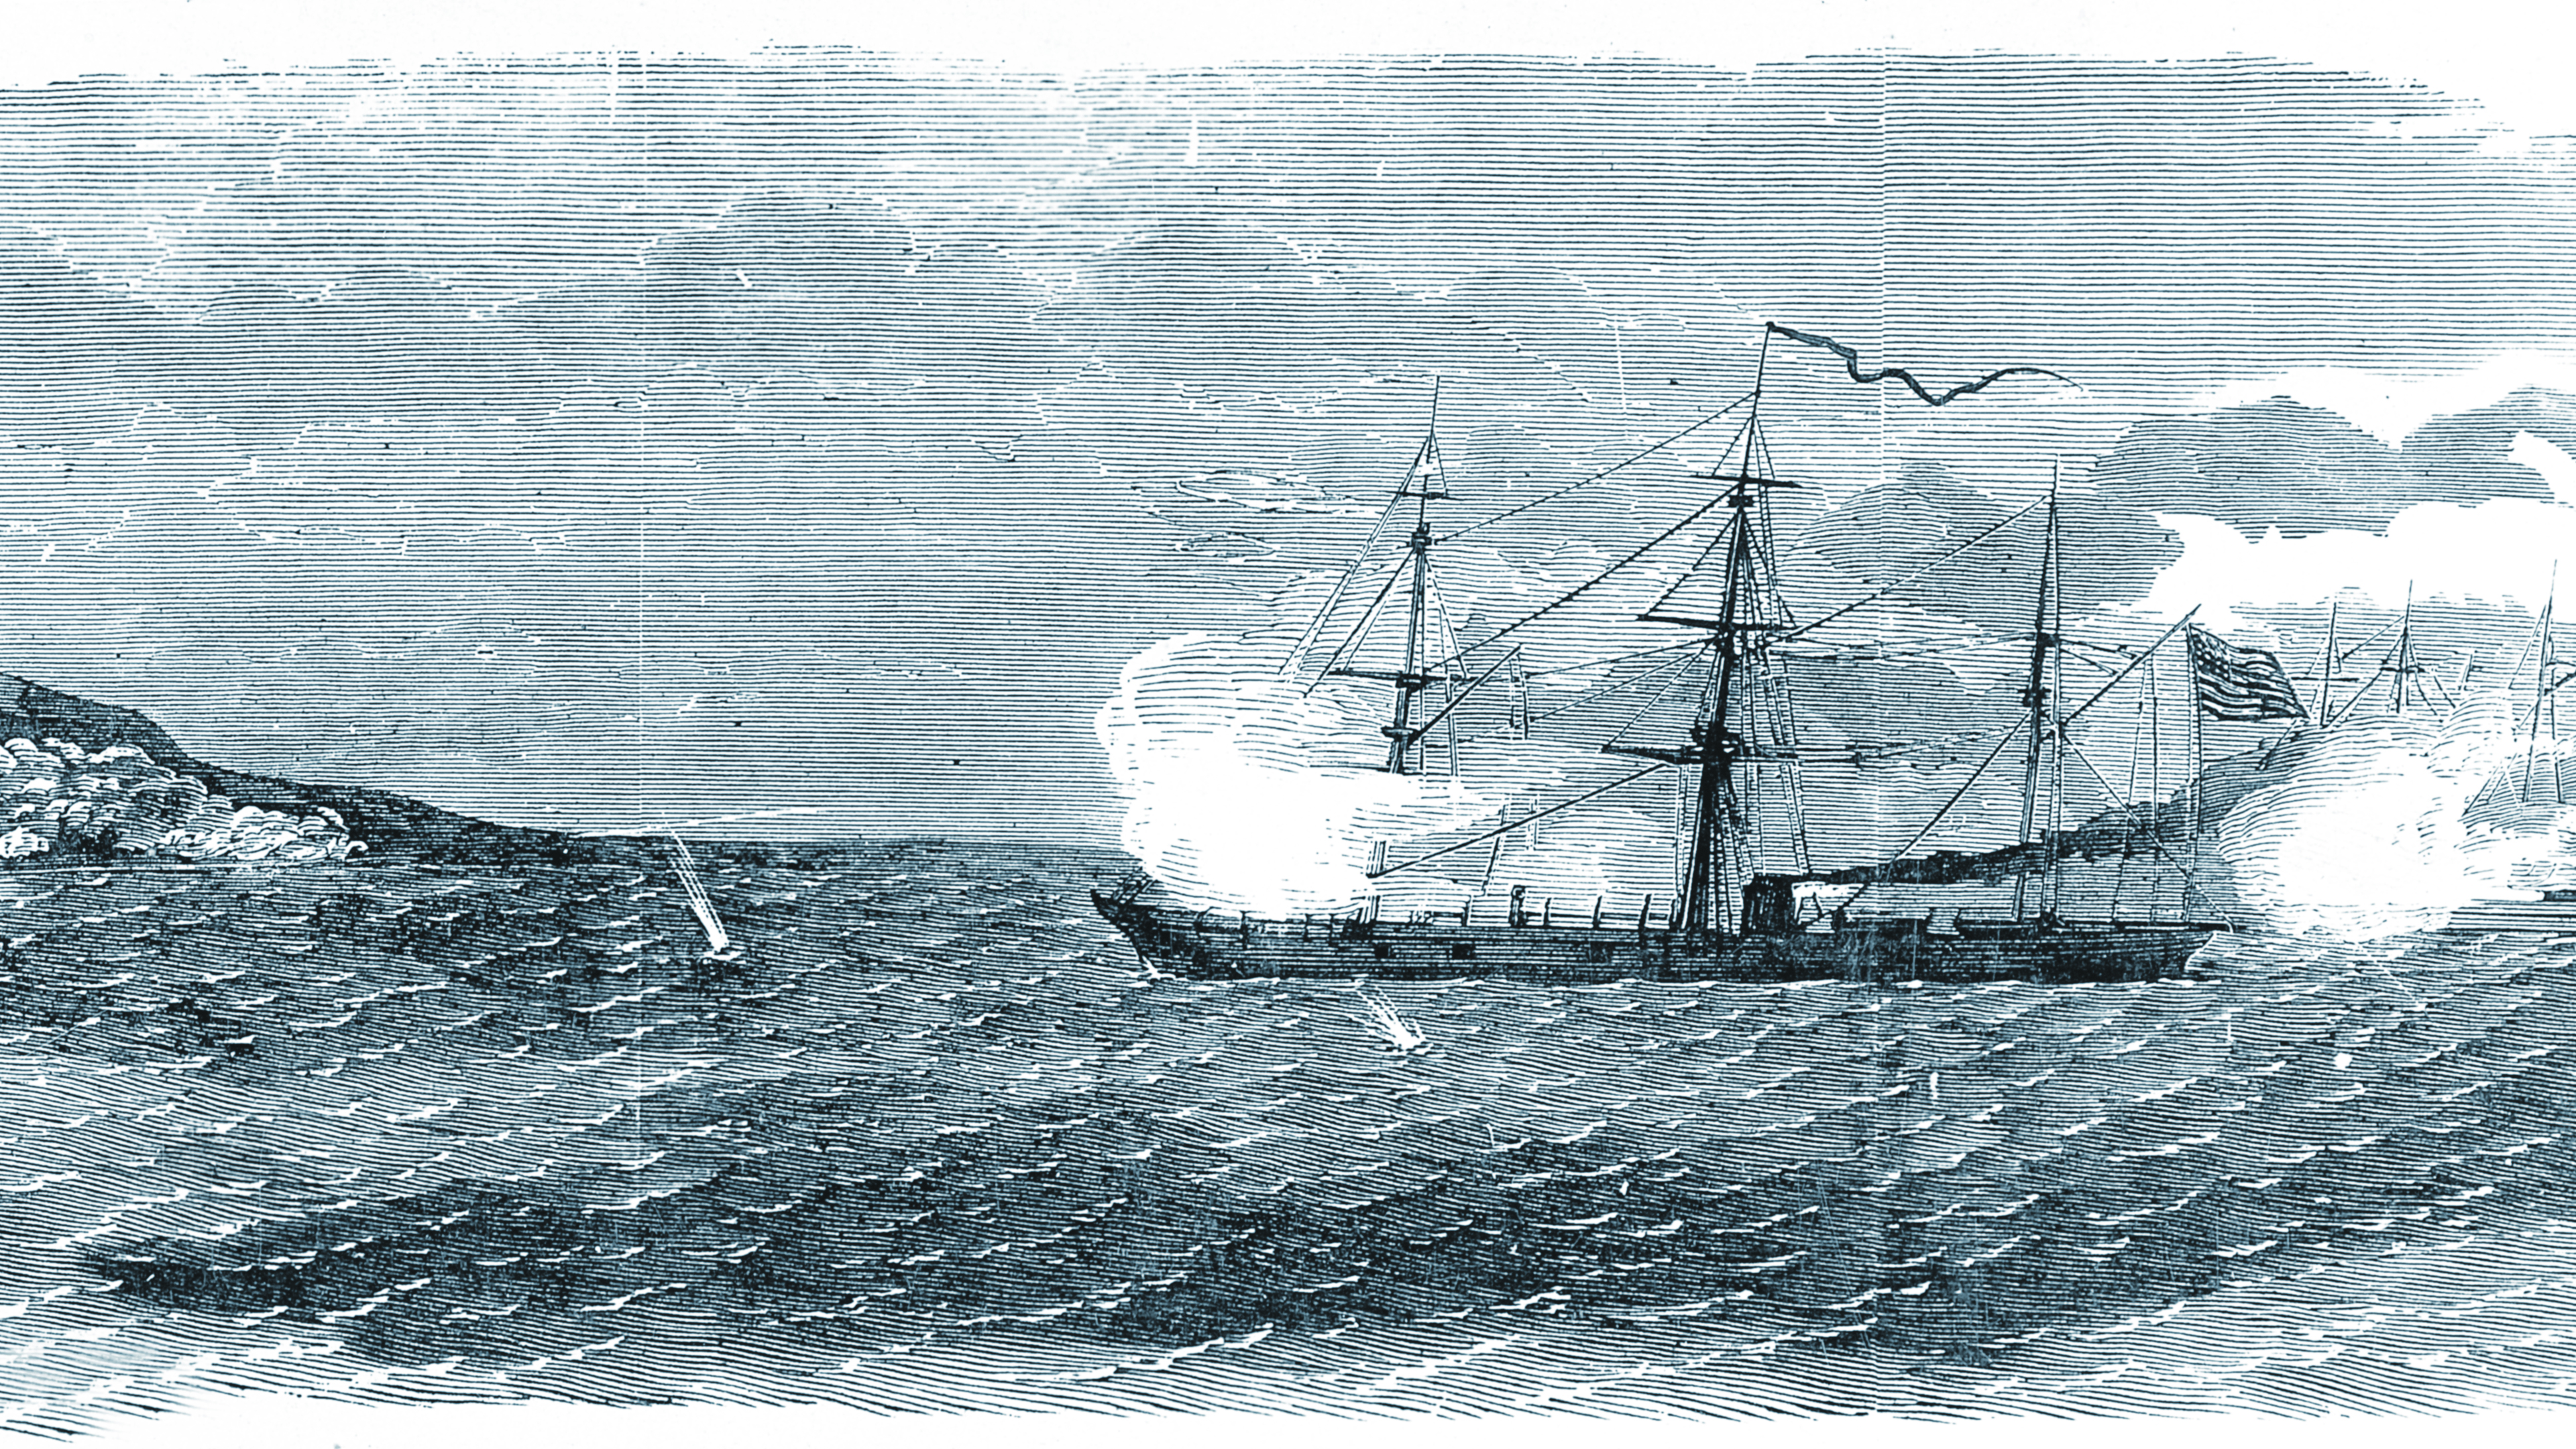 After scouting Rebel batteries that were popping up on the Virginia side of the river in the early weeks of the war, the Potomac Flotilla fired its first shots in anger at the Confederates’ Aquia Creek defenses May 29-June 1, 1861, as depicted in this wartime engraving. (Naval History and Heritage Command)